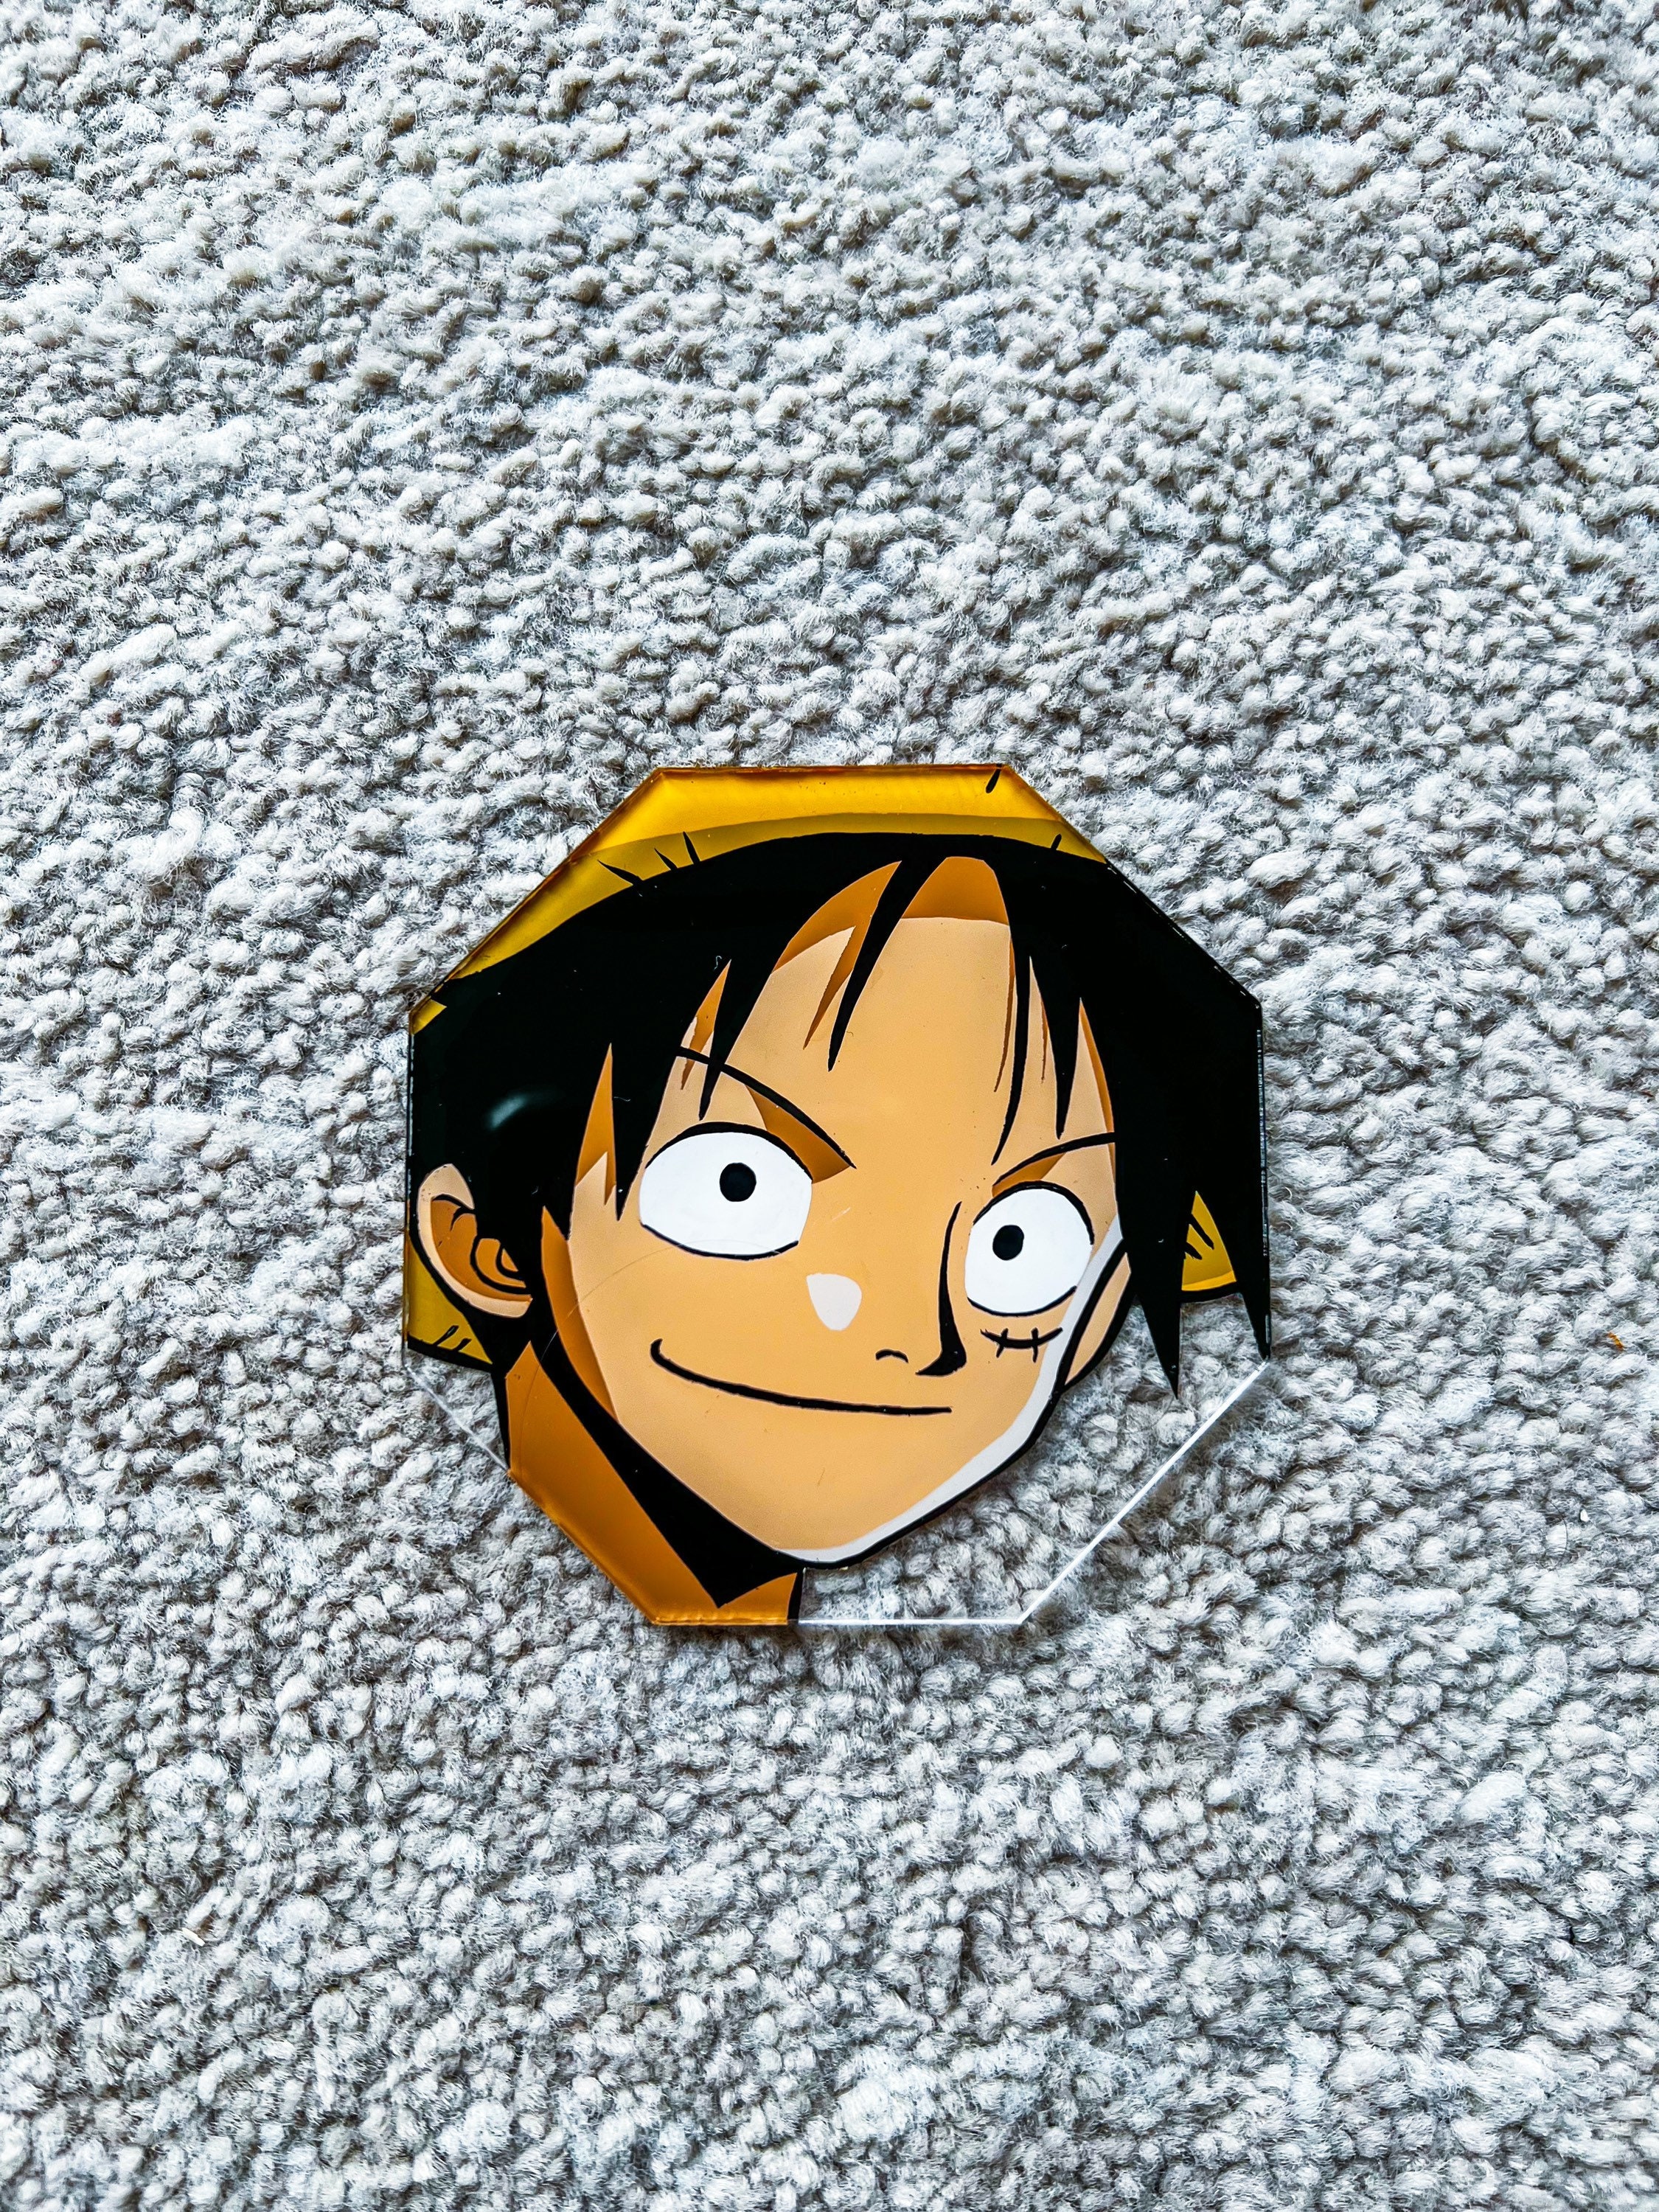 Luffy ONE PIECE - Coolbits Artworks